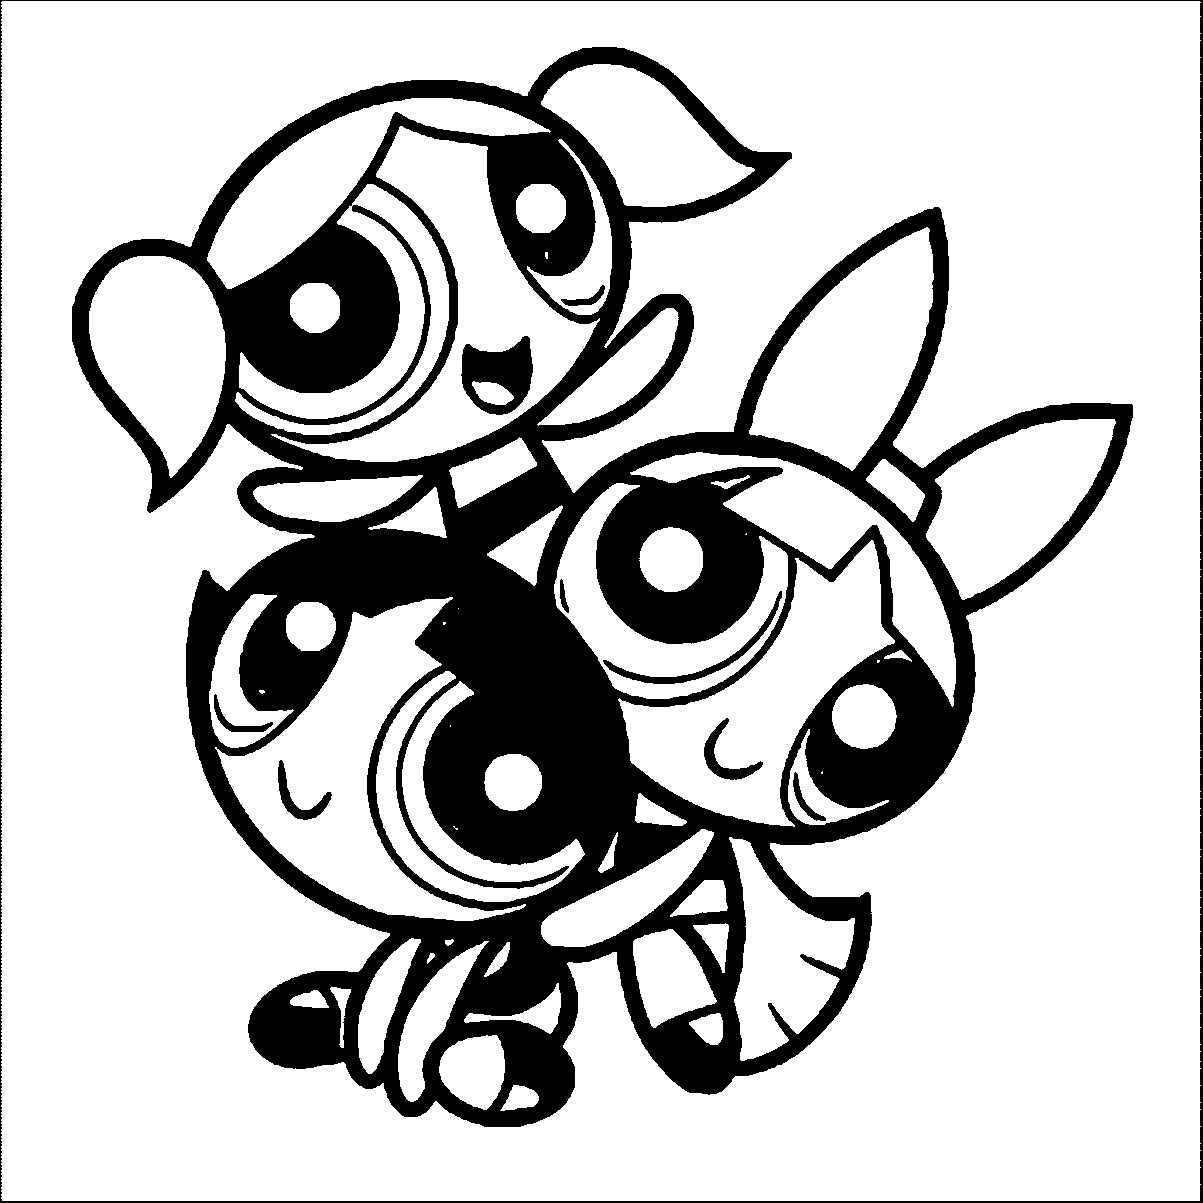 Powerpuff Girls Rowdy Rough Coloring Pages
 Powerpuff Girls Coloring Pages Coloring